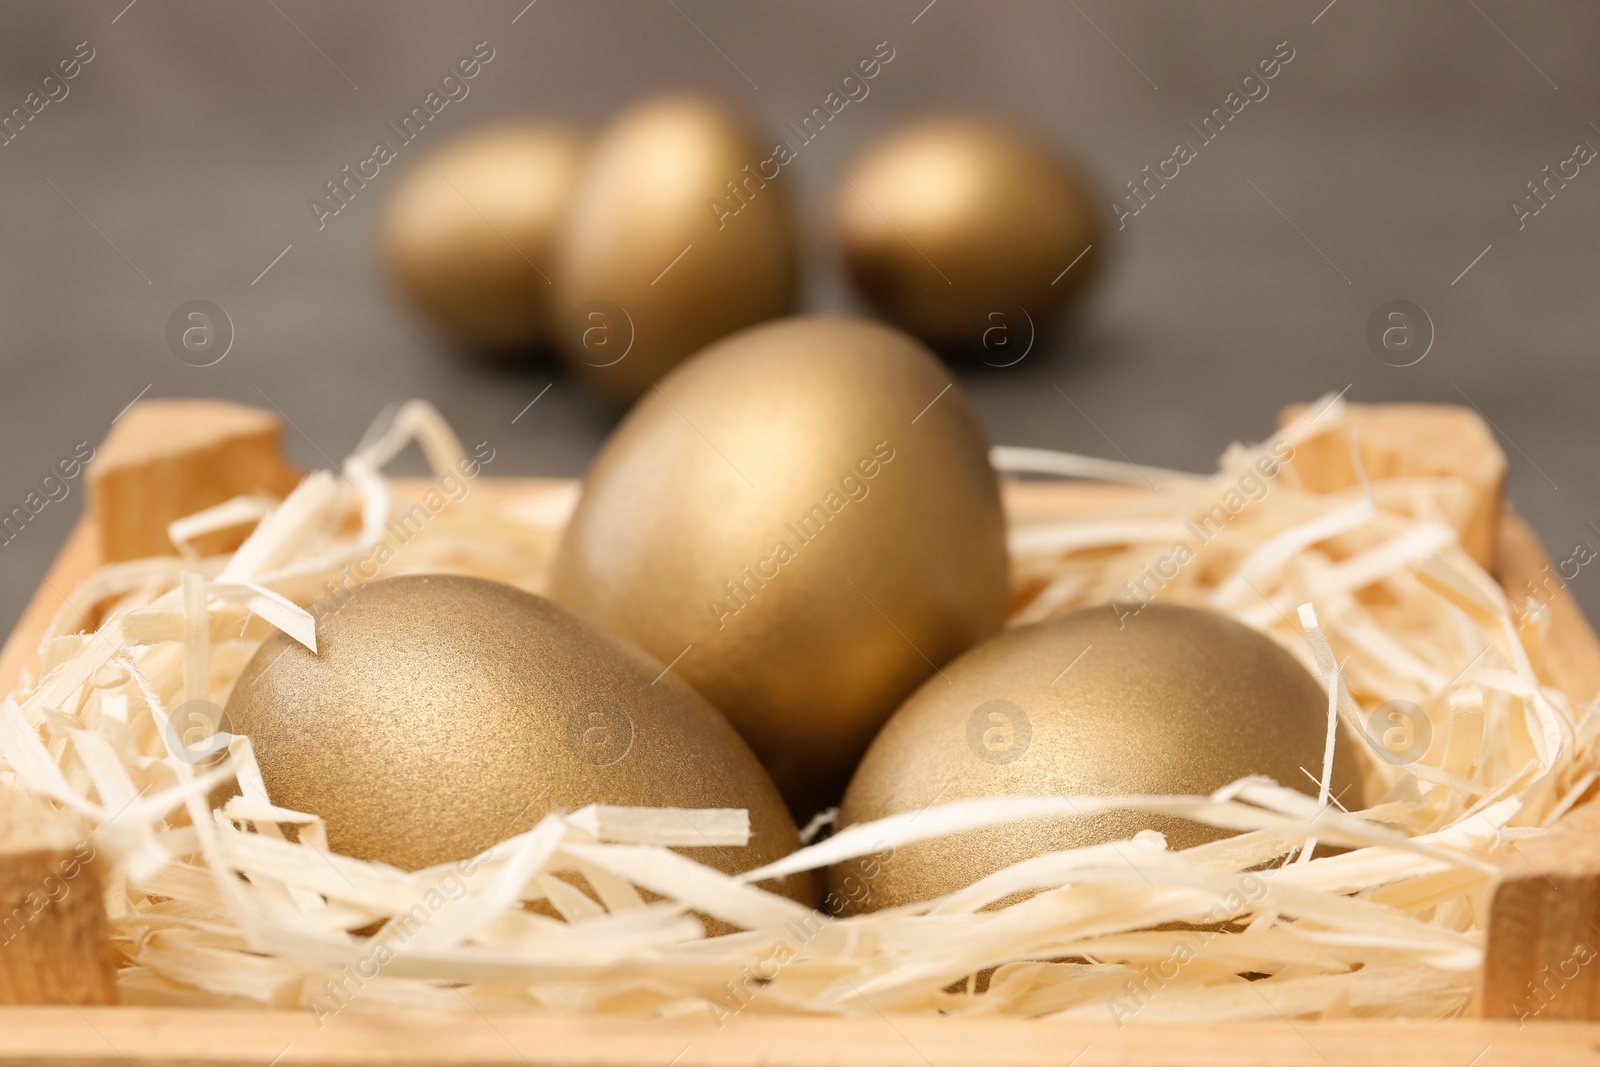 Photo of Wooden crate with golden eggs on blurred background, closeup